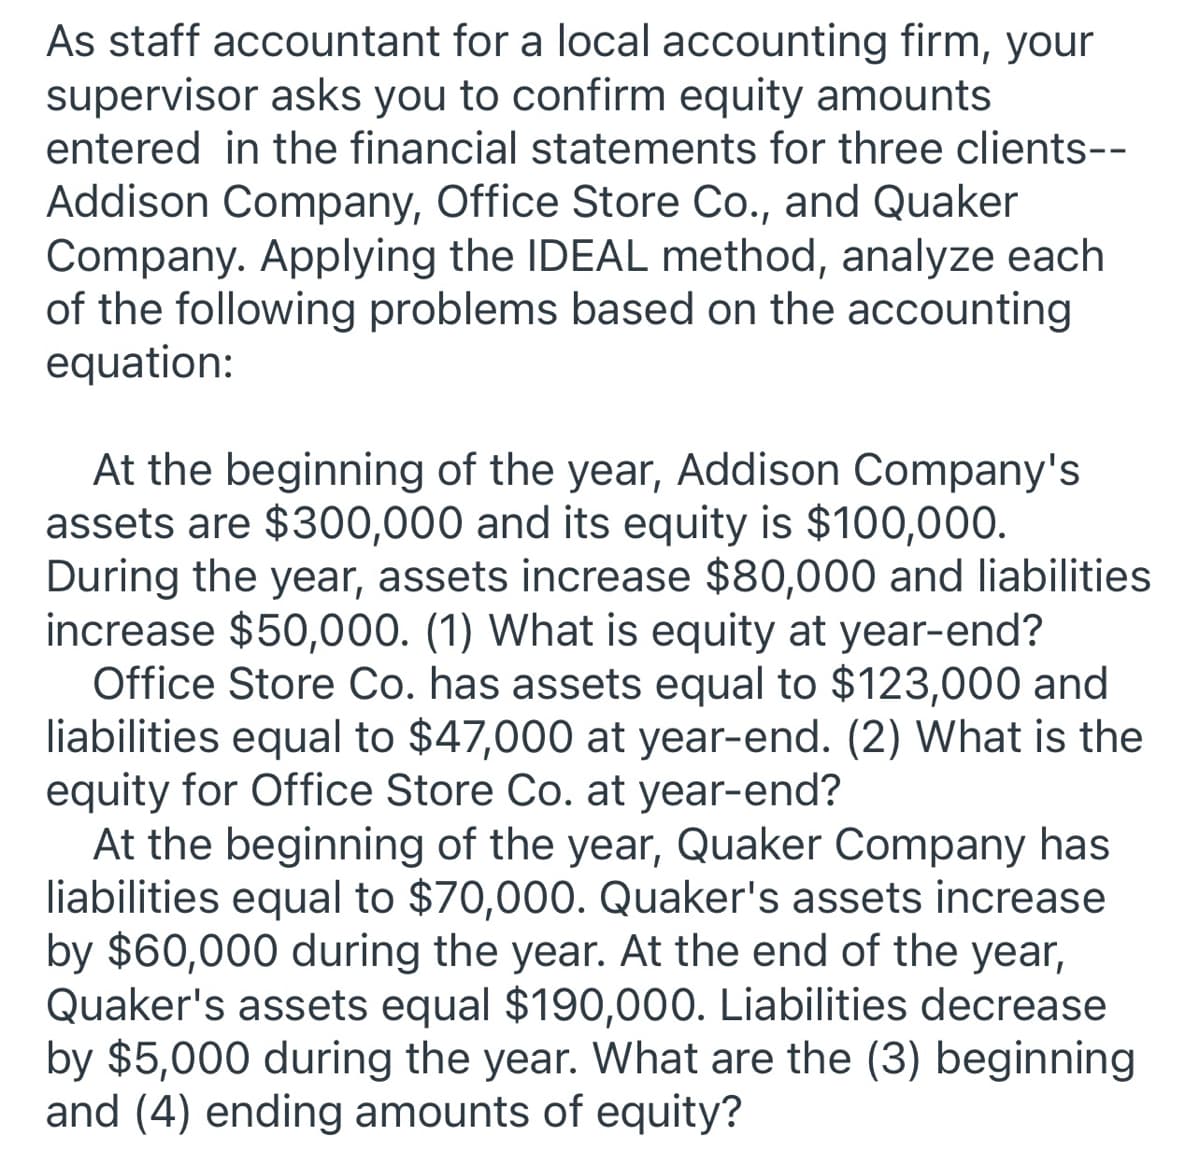 As staff accountant for a local accounting firm, your
supervisor asks you to confirm equity amounts
entered in the financial statements for three clients--
Addison Company, Office Store Co., and Quaker
Company. Applying the IDEAL method, analyze each
of the following problems based on the accounting
equation:
At the beginning of the year, Addison Company's
assets are $300,000 and its equity is $100,000.
During the year, assets increase $80,000 and liabilities
increase $50,000. (1) What is equity at year-end?
Office Store Co. has assets equal to $123,000 and
liabilities equal to $47,000 at year-end. (2) What is the
equity for Office Store Co. at year-end?
At the beginning of the year, Quaker Company has
liabilities equal to $70,000. Quaker's assets increase
by $60,000 during the year. At the end of the year,
Quaker's assets equal $190,000. Liabilities decrease
by $5,000 during the year. What are the (3) beginning
and (4) ending amounts of equity?